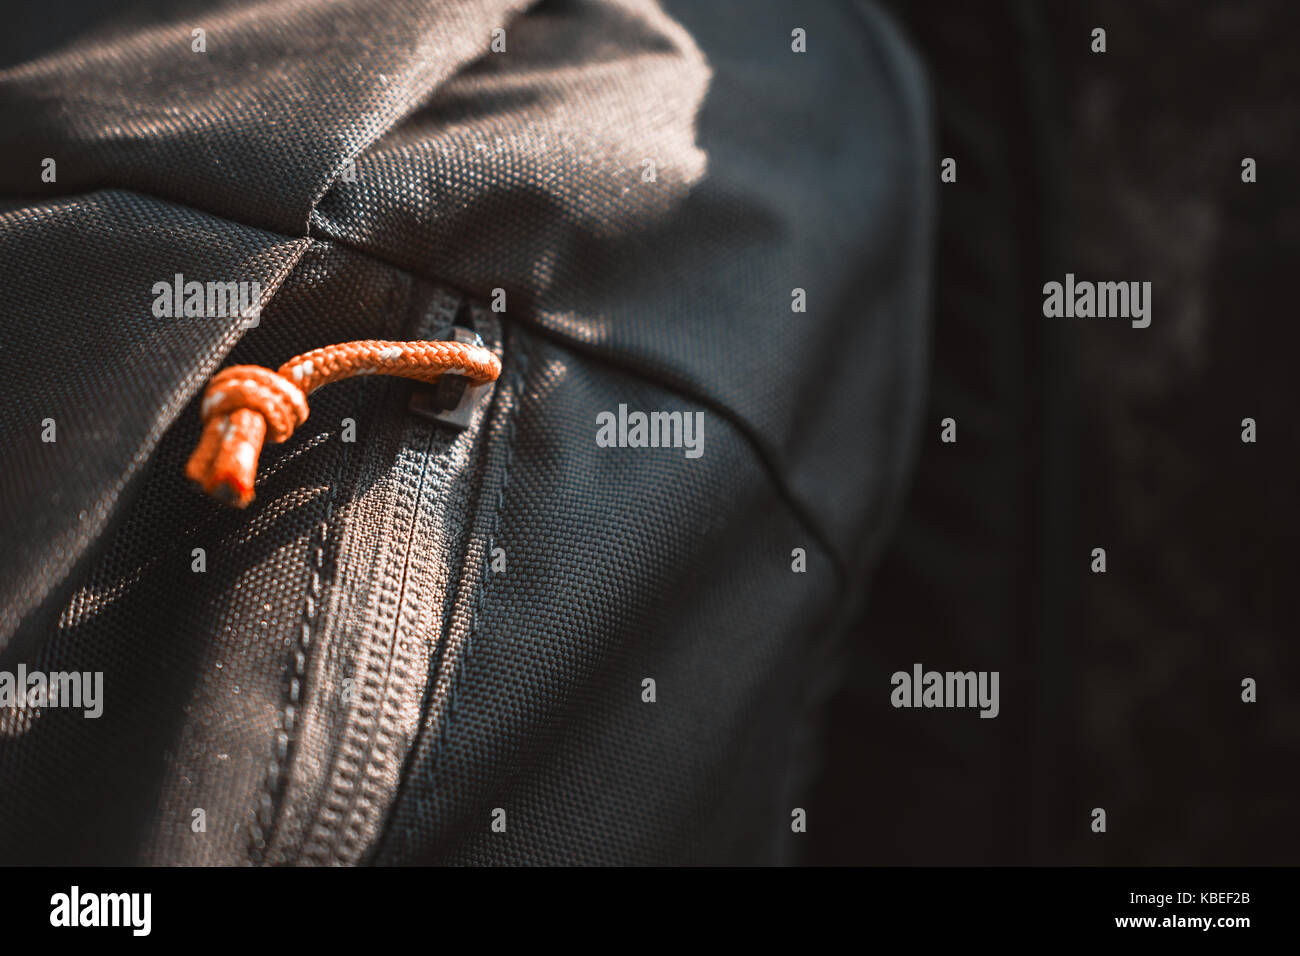 Close-Up Of Olive Green Backpack With Orange Zipper Placed On A Rock Stock Photo